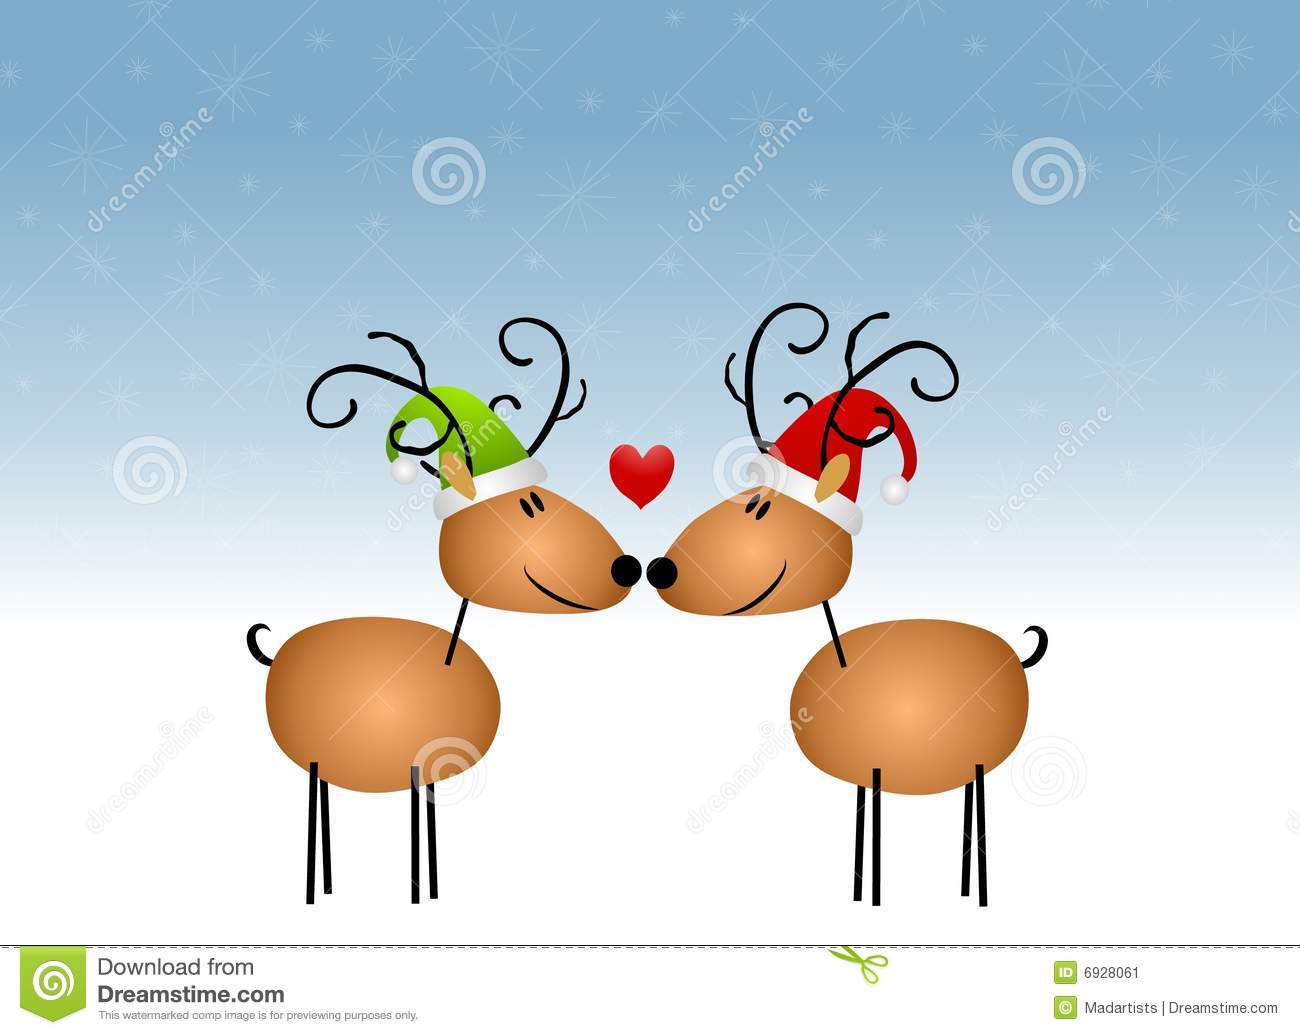 Featuring A Pair Of Cartoon Reindeer Kissing Noses In The Snow